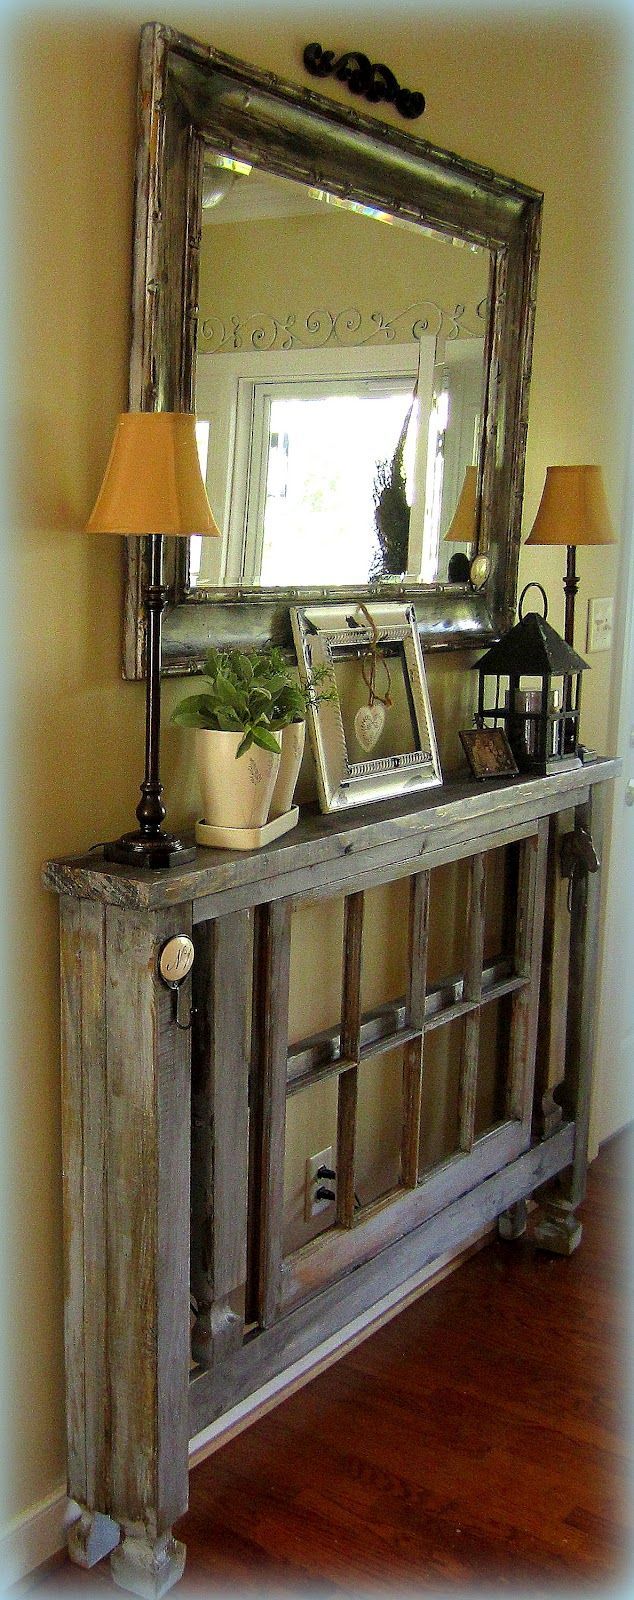 Entry way decor – No room in your hall way or entry?  Wow… this solves it.  My